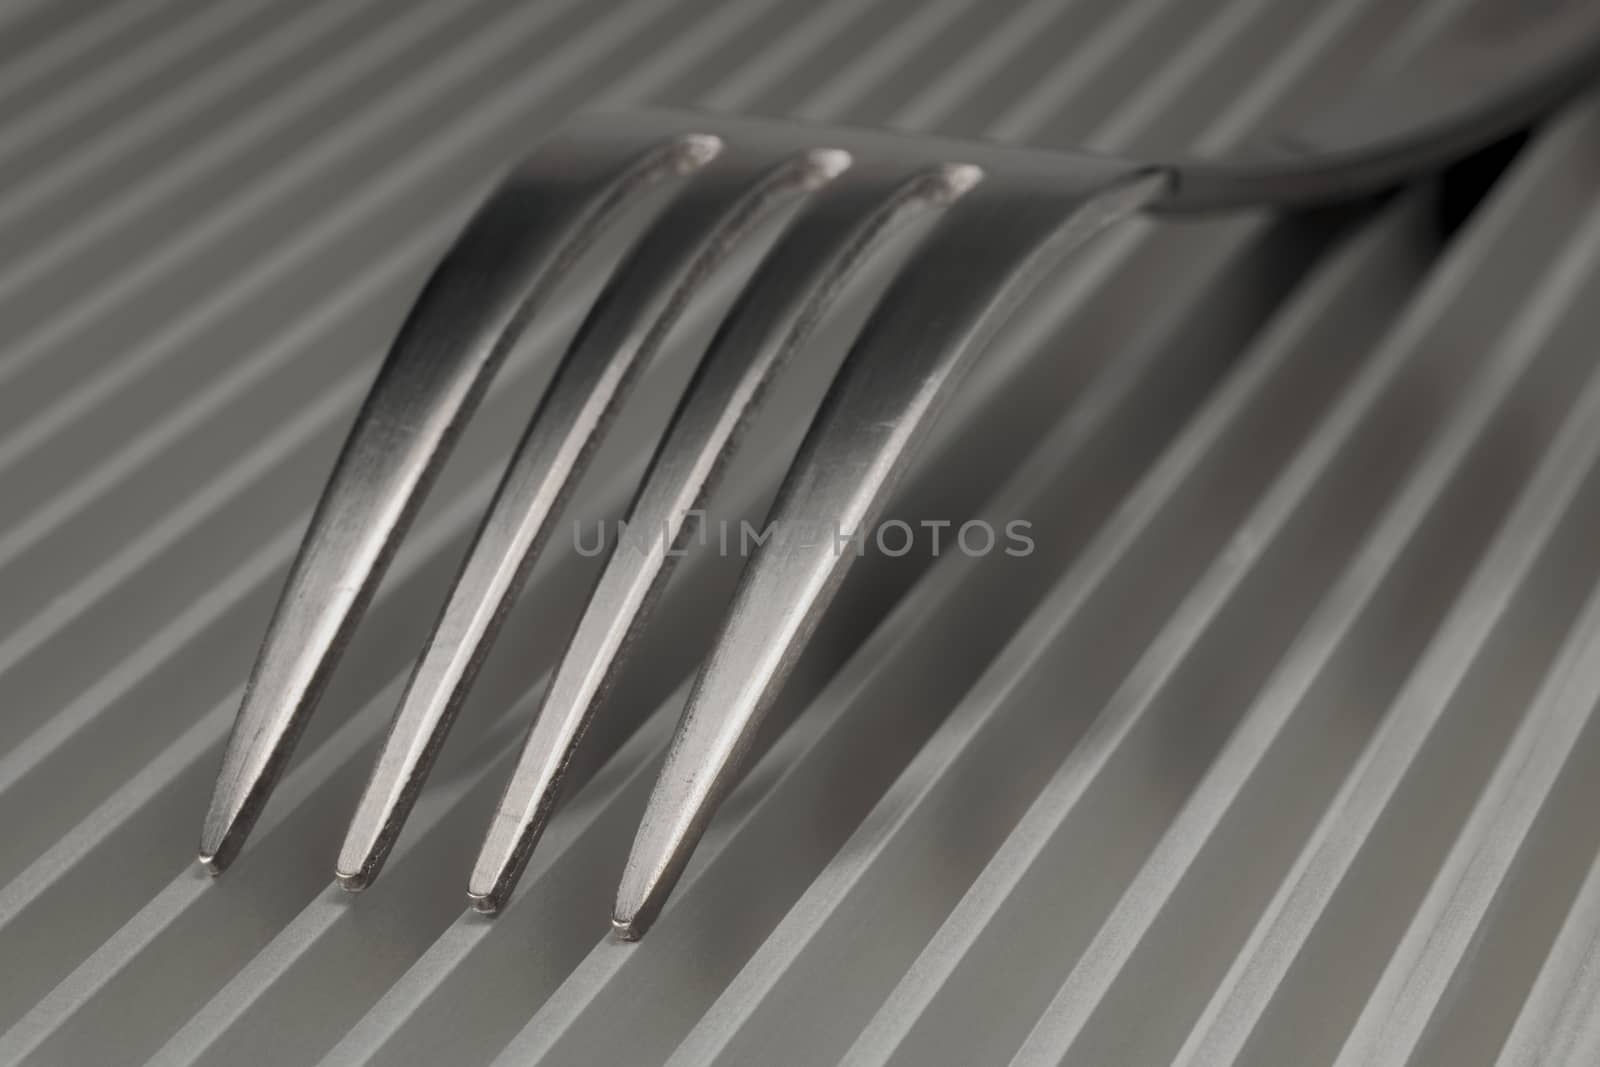 Abstract artistic picture of forks on a parallel grid structure
